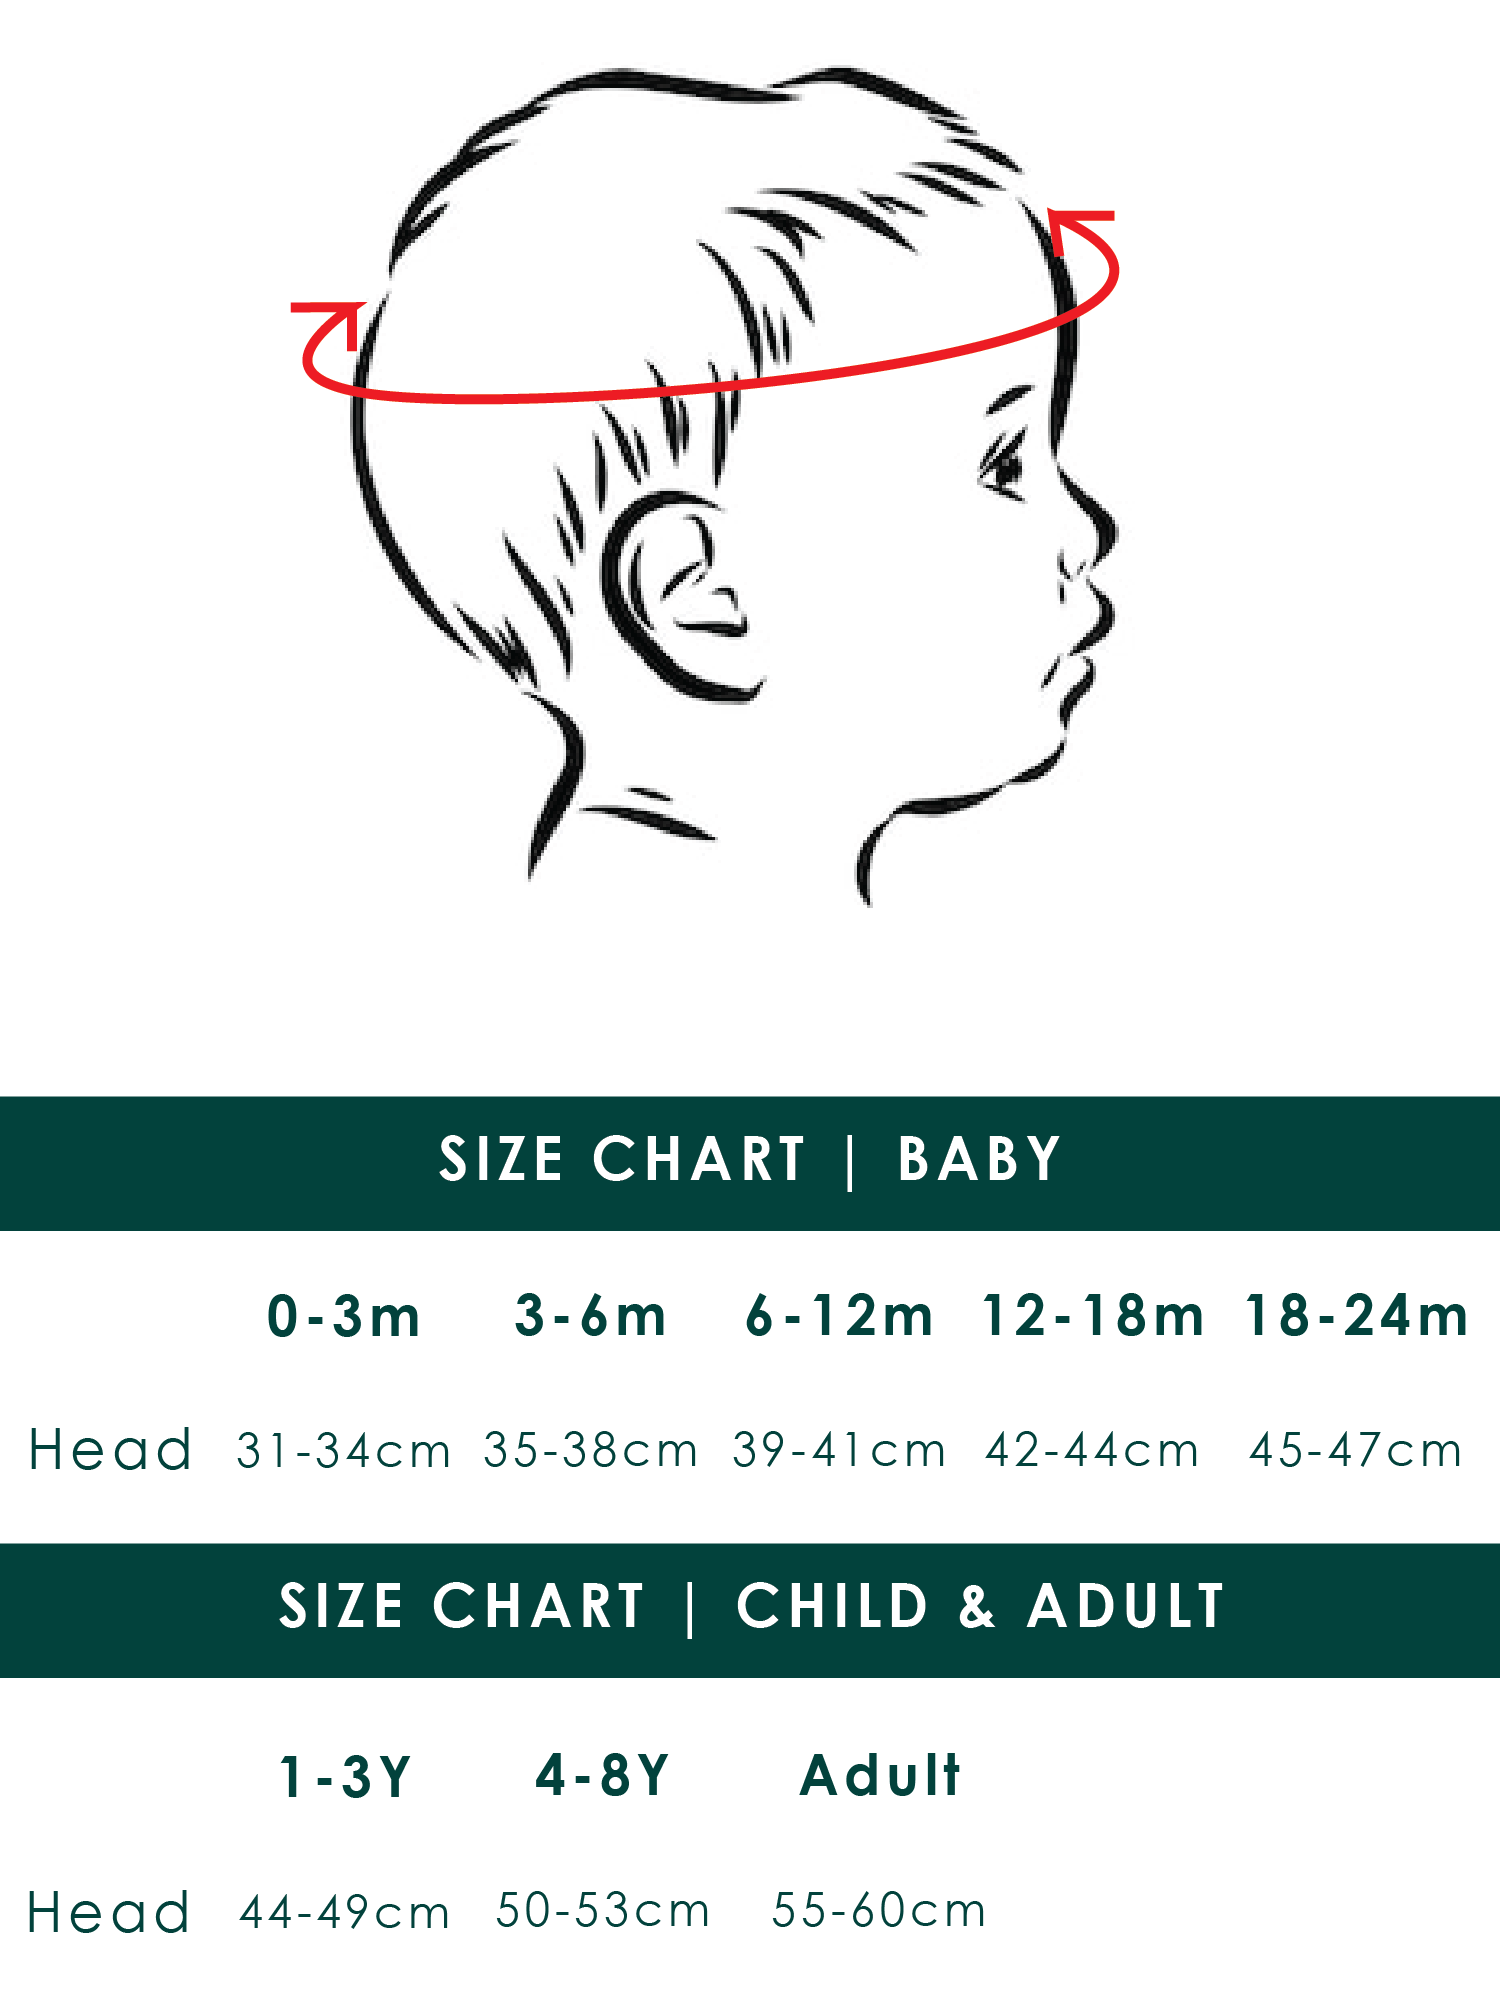 Hat size guide for Wilderling Merino hat snad sun hats and sun bonnets. For babies and children made in New Zealand.